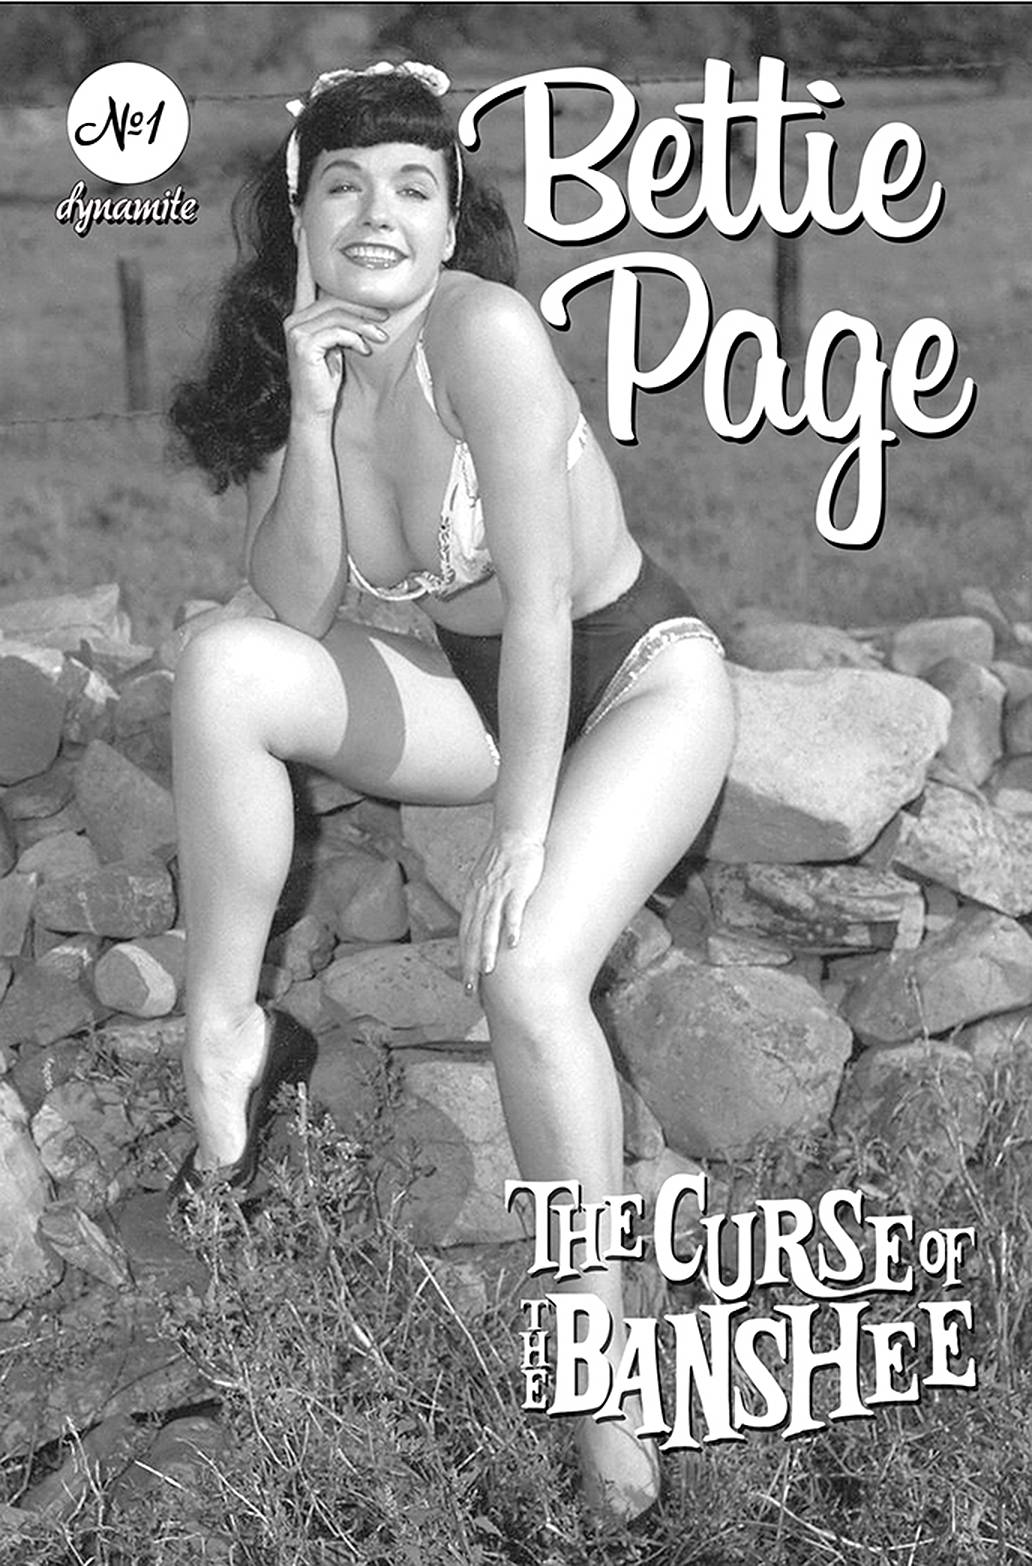 BETTIE PAGE & CURSE OF THE BANSHEE